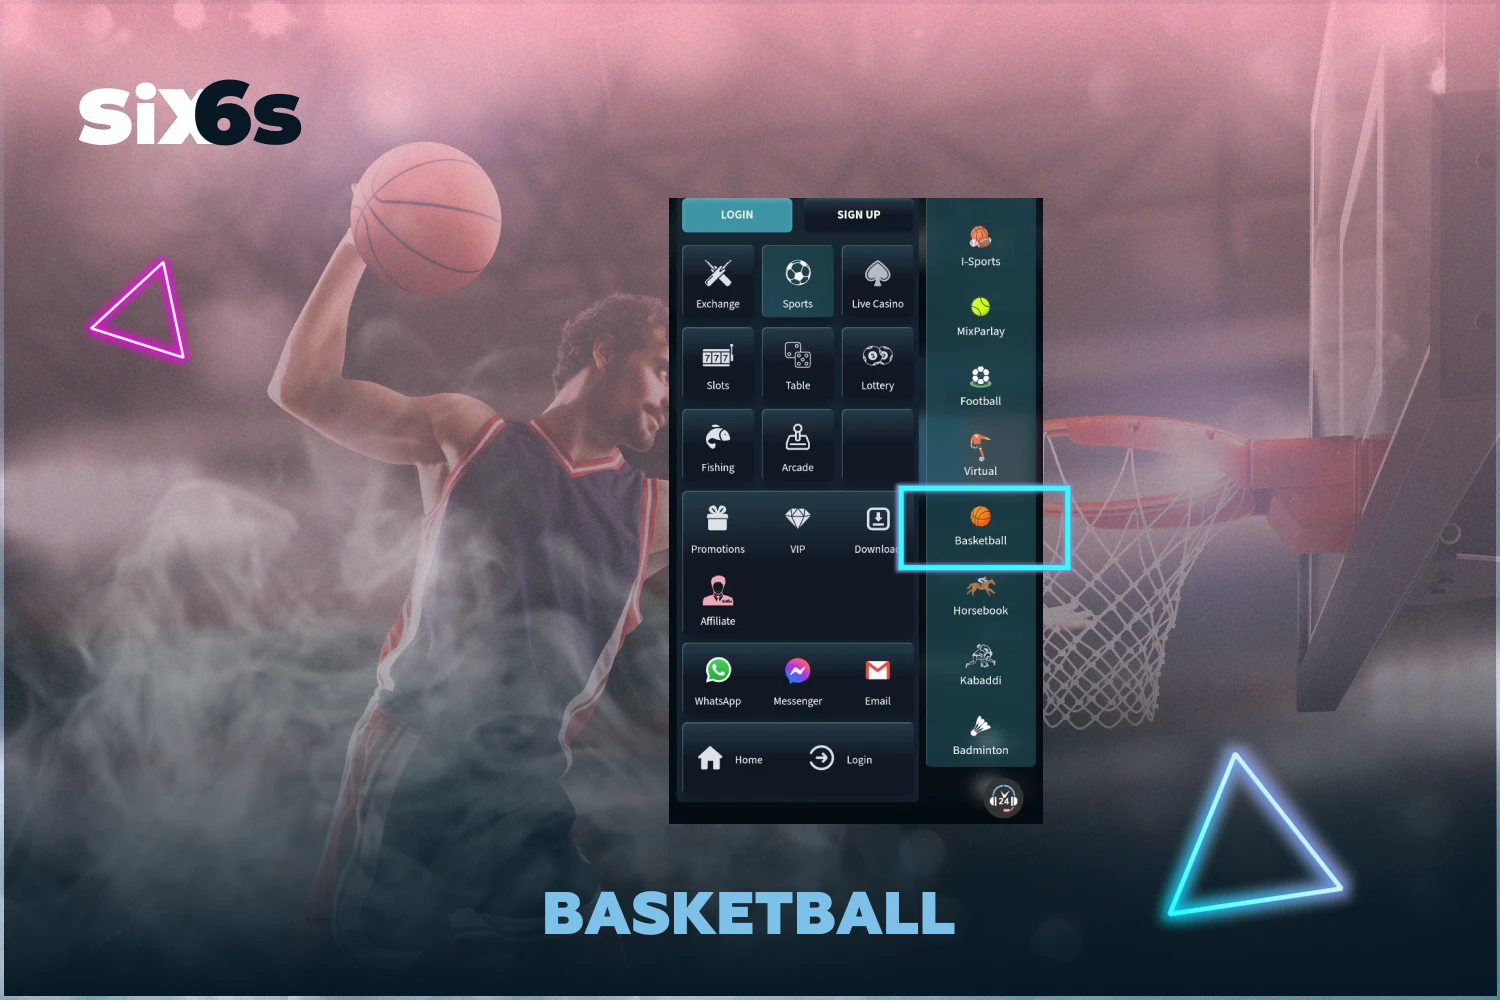 On the basketball page on the best Six6s betting site in Bangladesh, punters will find all the official tournaments